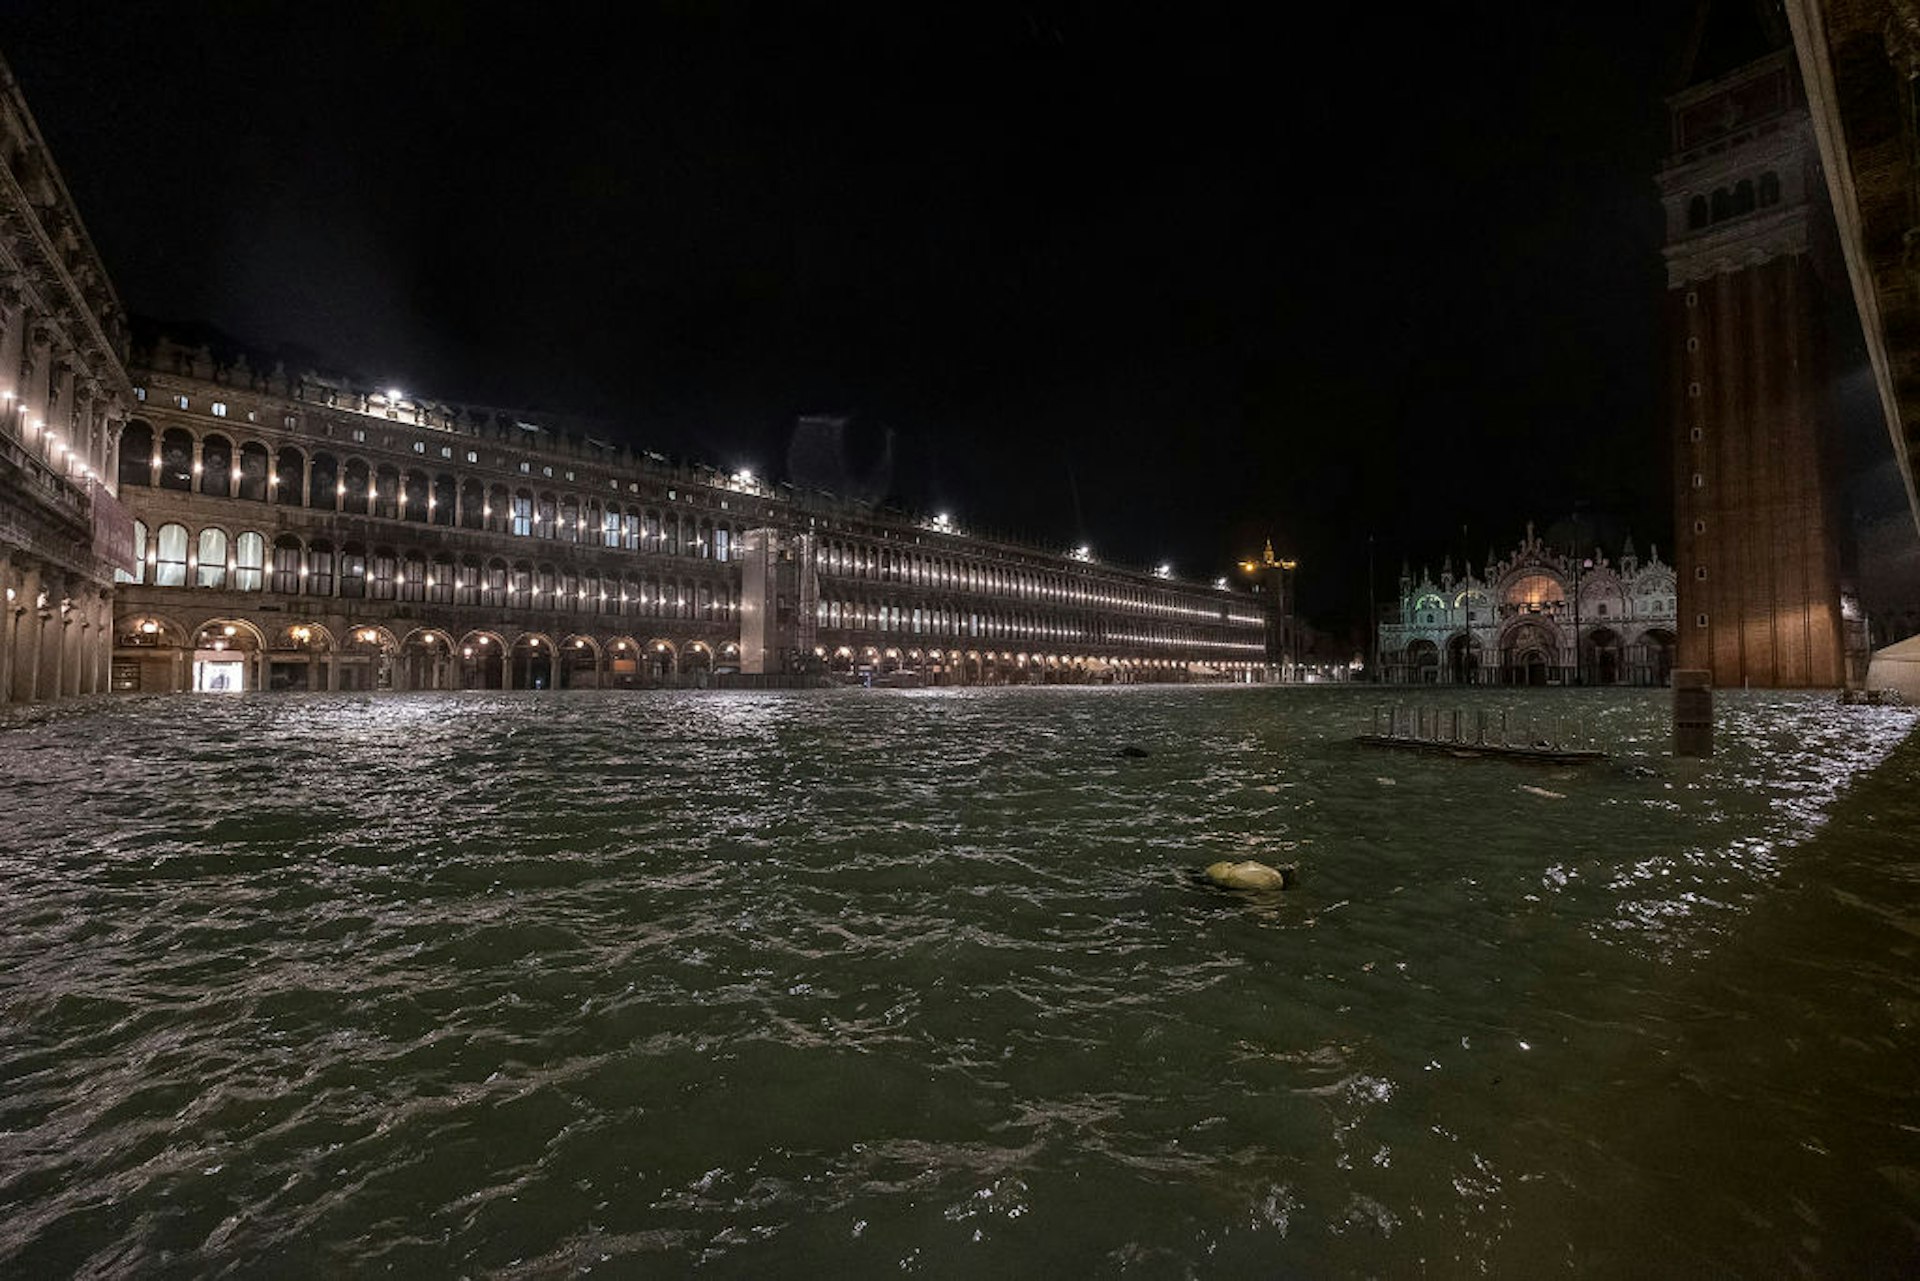 The Piazza San Marco under water during a flood